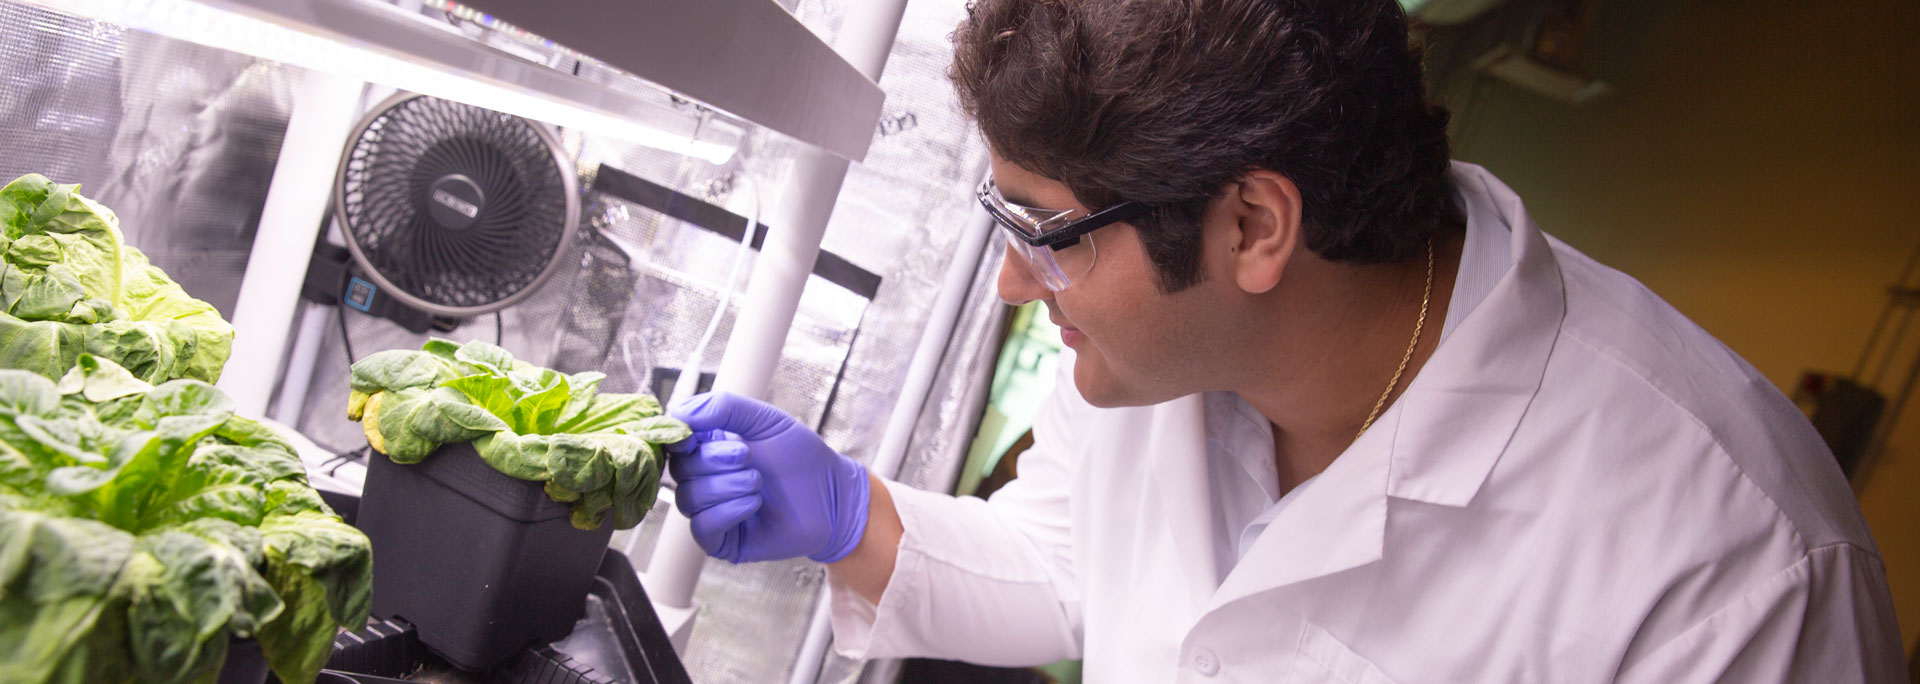 A student examines a plant in a research lab.